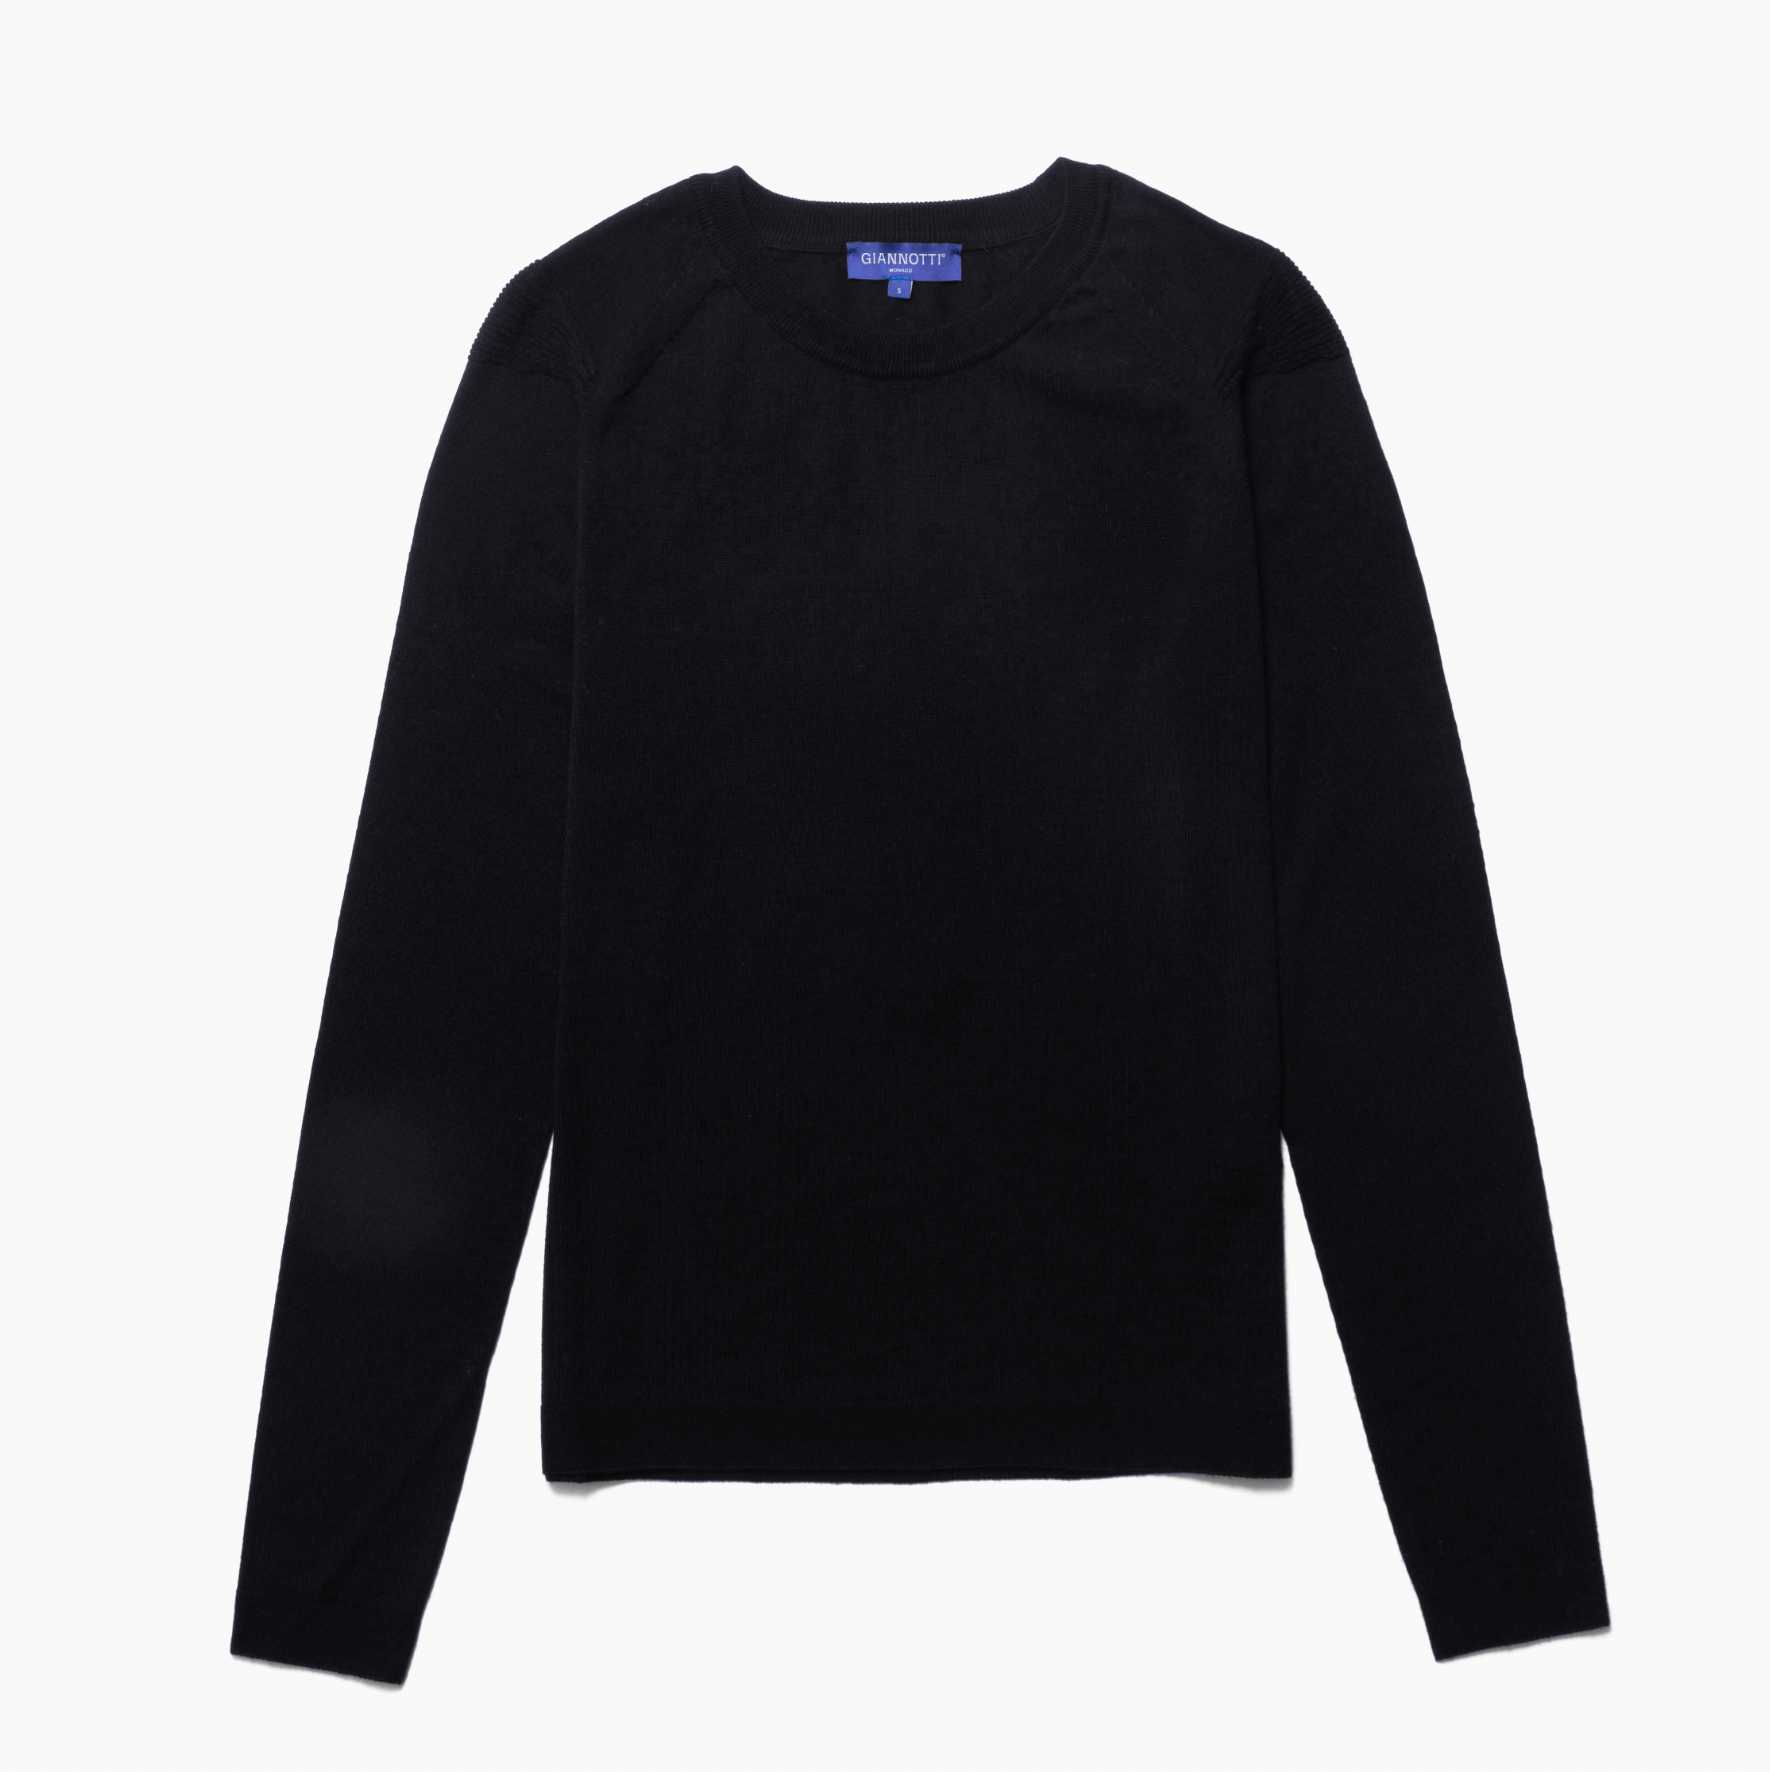 Recycled Cashmere Exposed Seam Crew Neck Sweater - Black